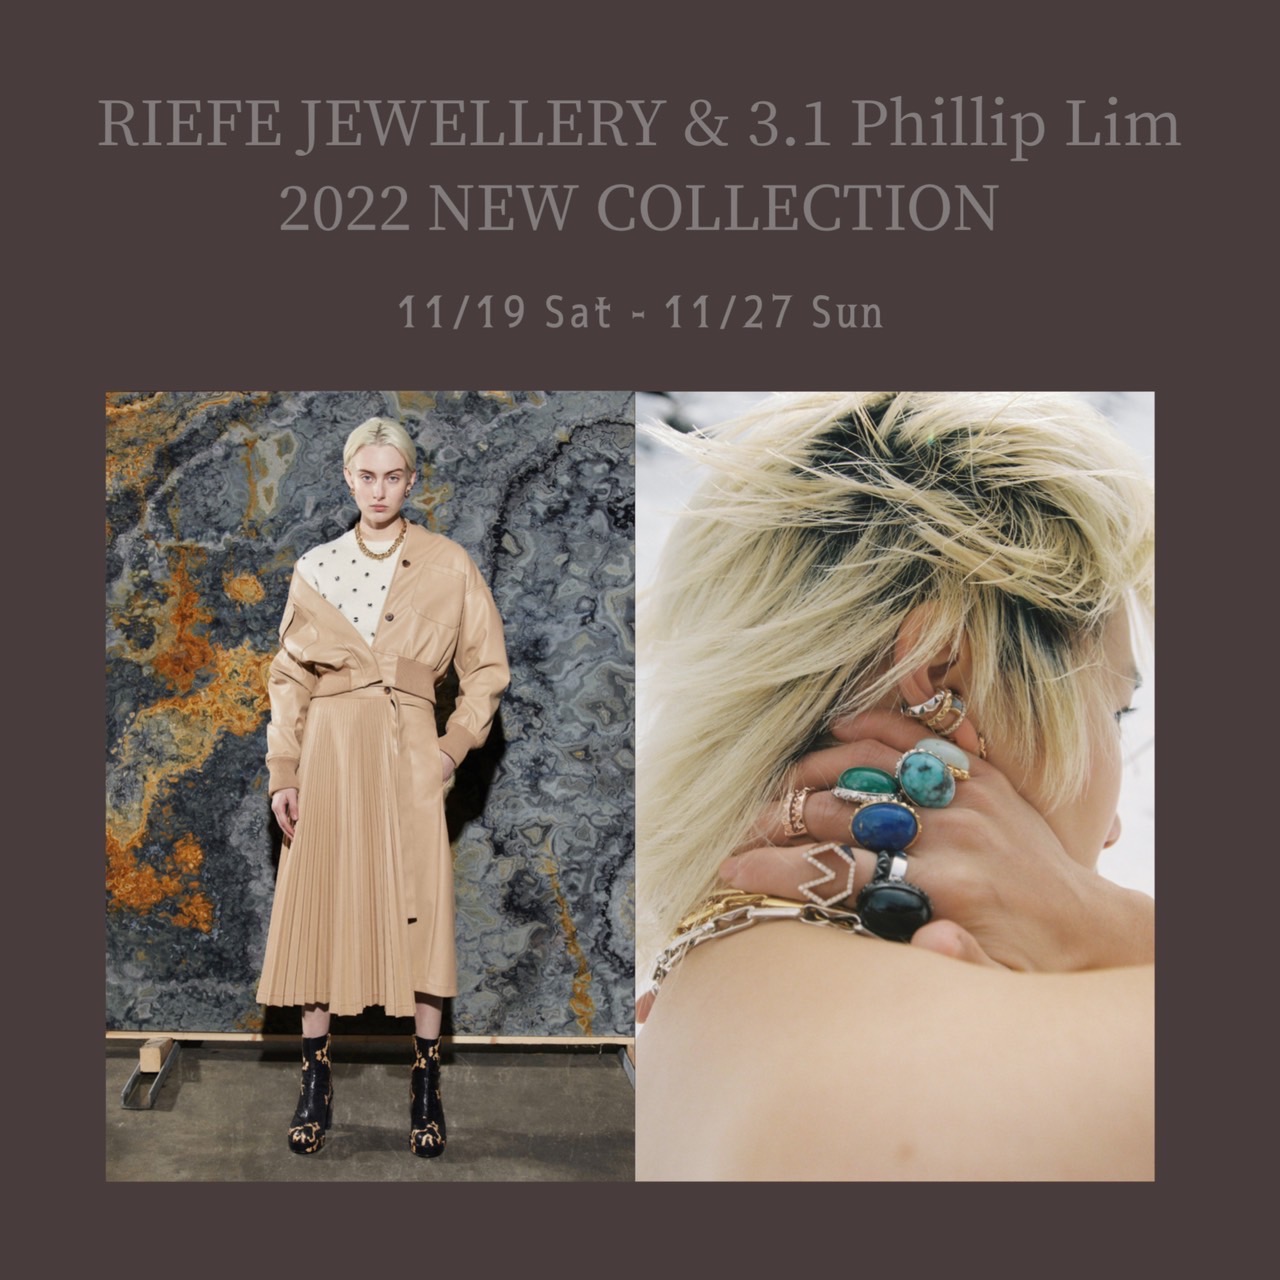 RIEFE JEWELLERY & 3.1 Phillip Lim  NEW COLLECTION